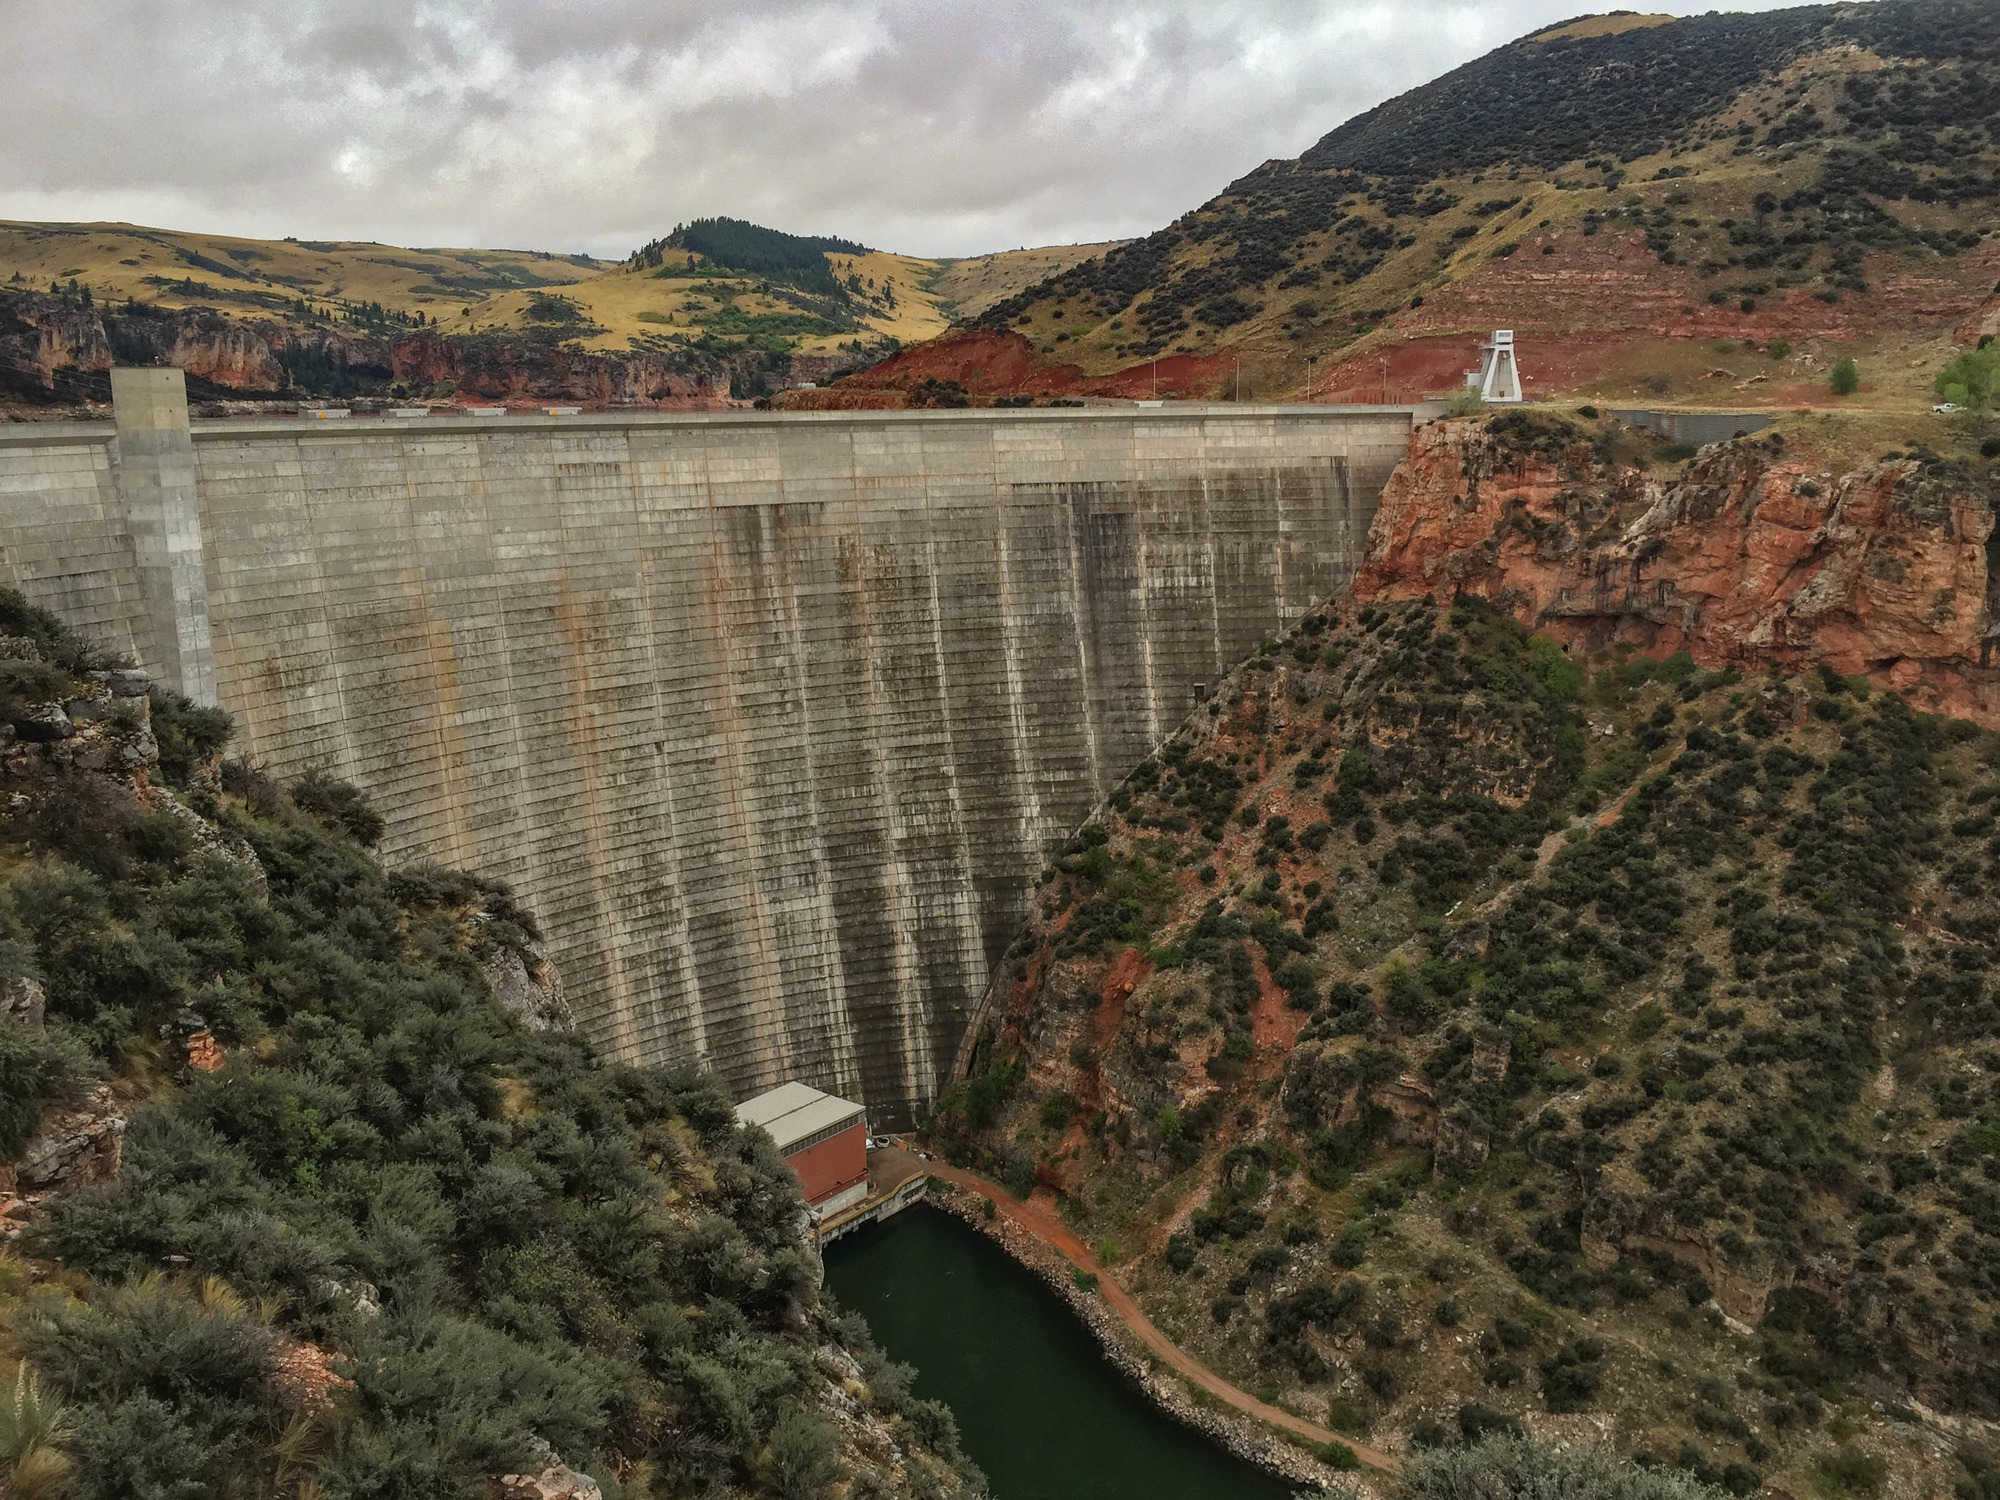 Dam in a red-rocked canyon